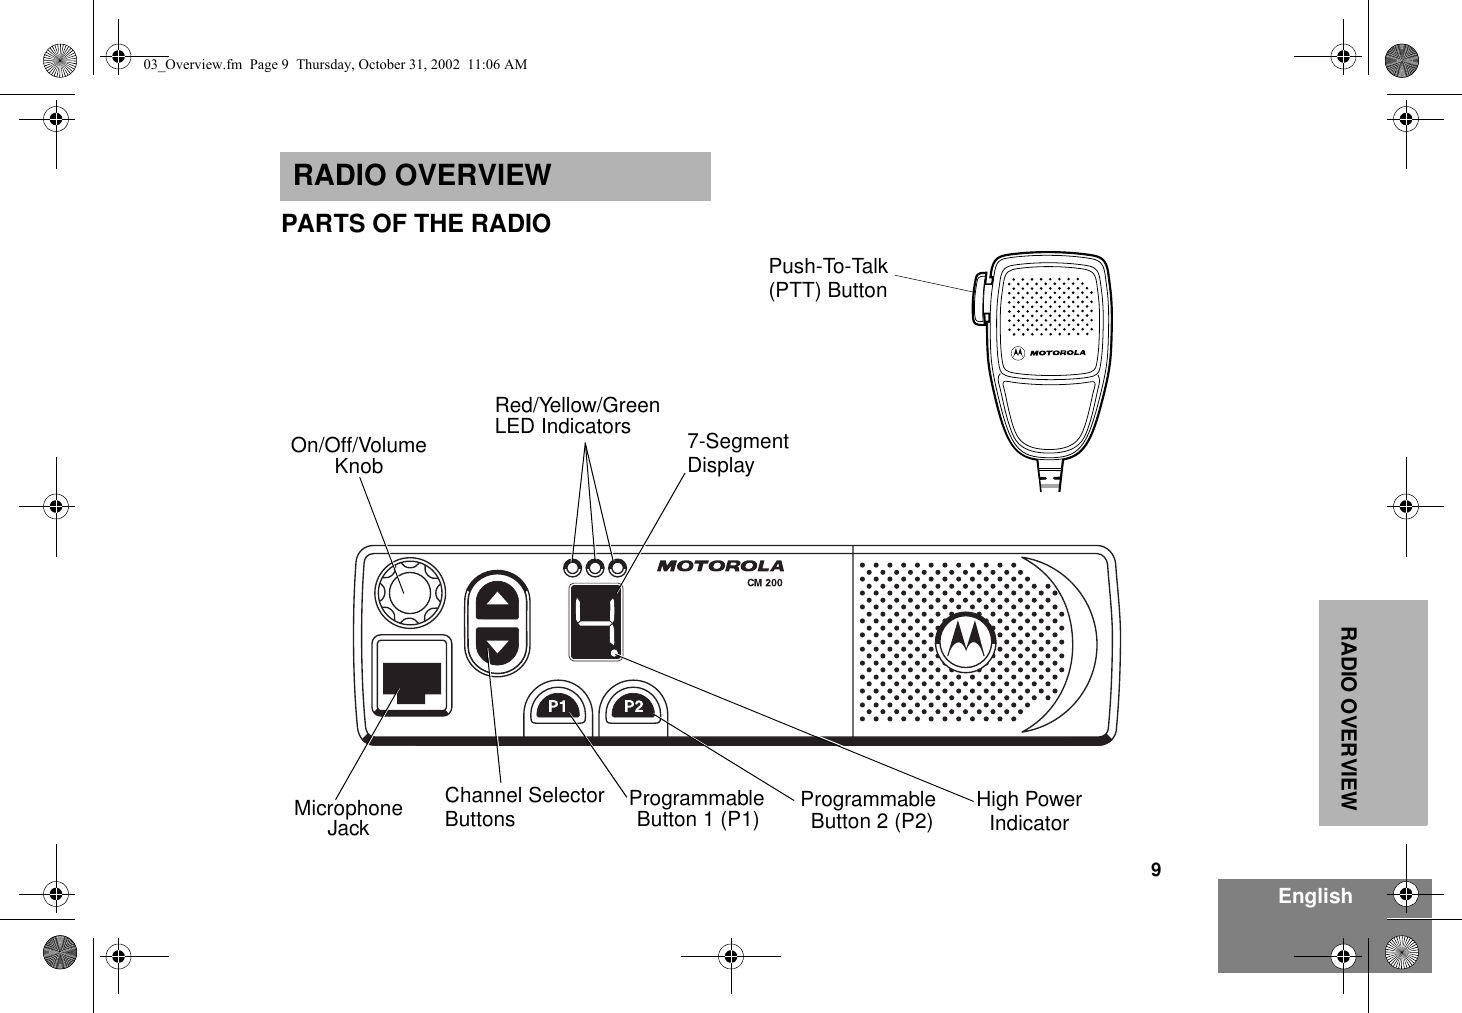 9EnglishRADIO OVERVIEWRADIO OVERVIEWPARTS OF THE RADIORed/Yellow/GreenLED IndicatorsButton 1 (P1)MicrophoneJackKnobOn/Off/VolumeProgrammable7-SegmentDisplayProgrammableButton 2 (P2)Channel SelectorButtonsPush-To-Talk(PTT) ButtonHigh PowerIndicator03_Overview.fm  Page 9  Thursday, October 31, 2002  11:06 AM